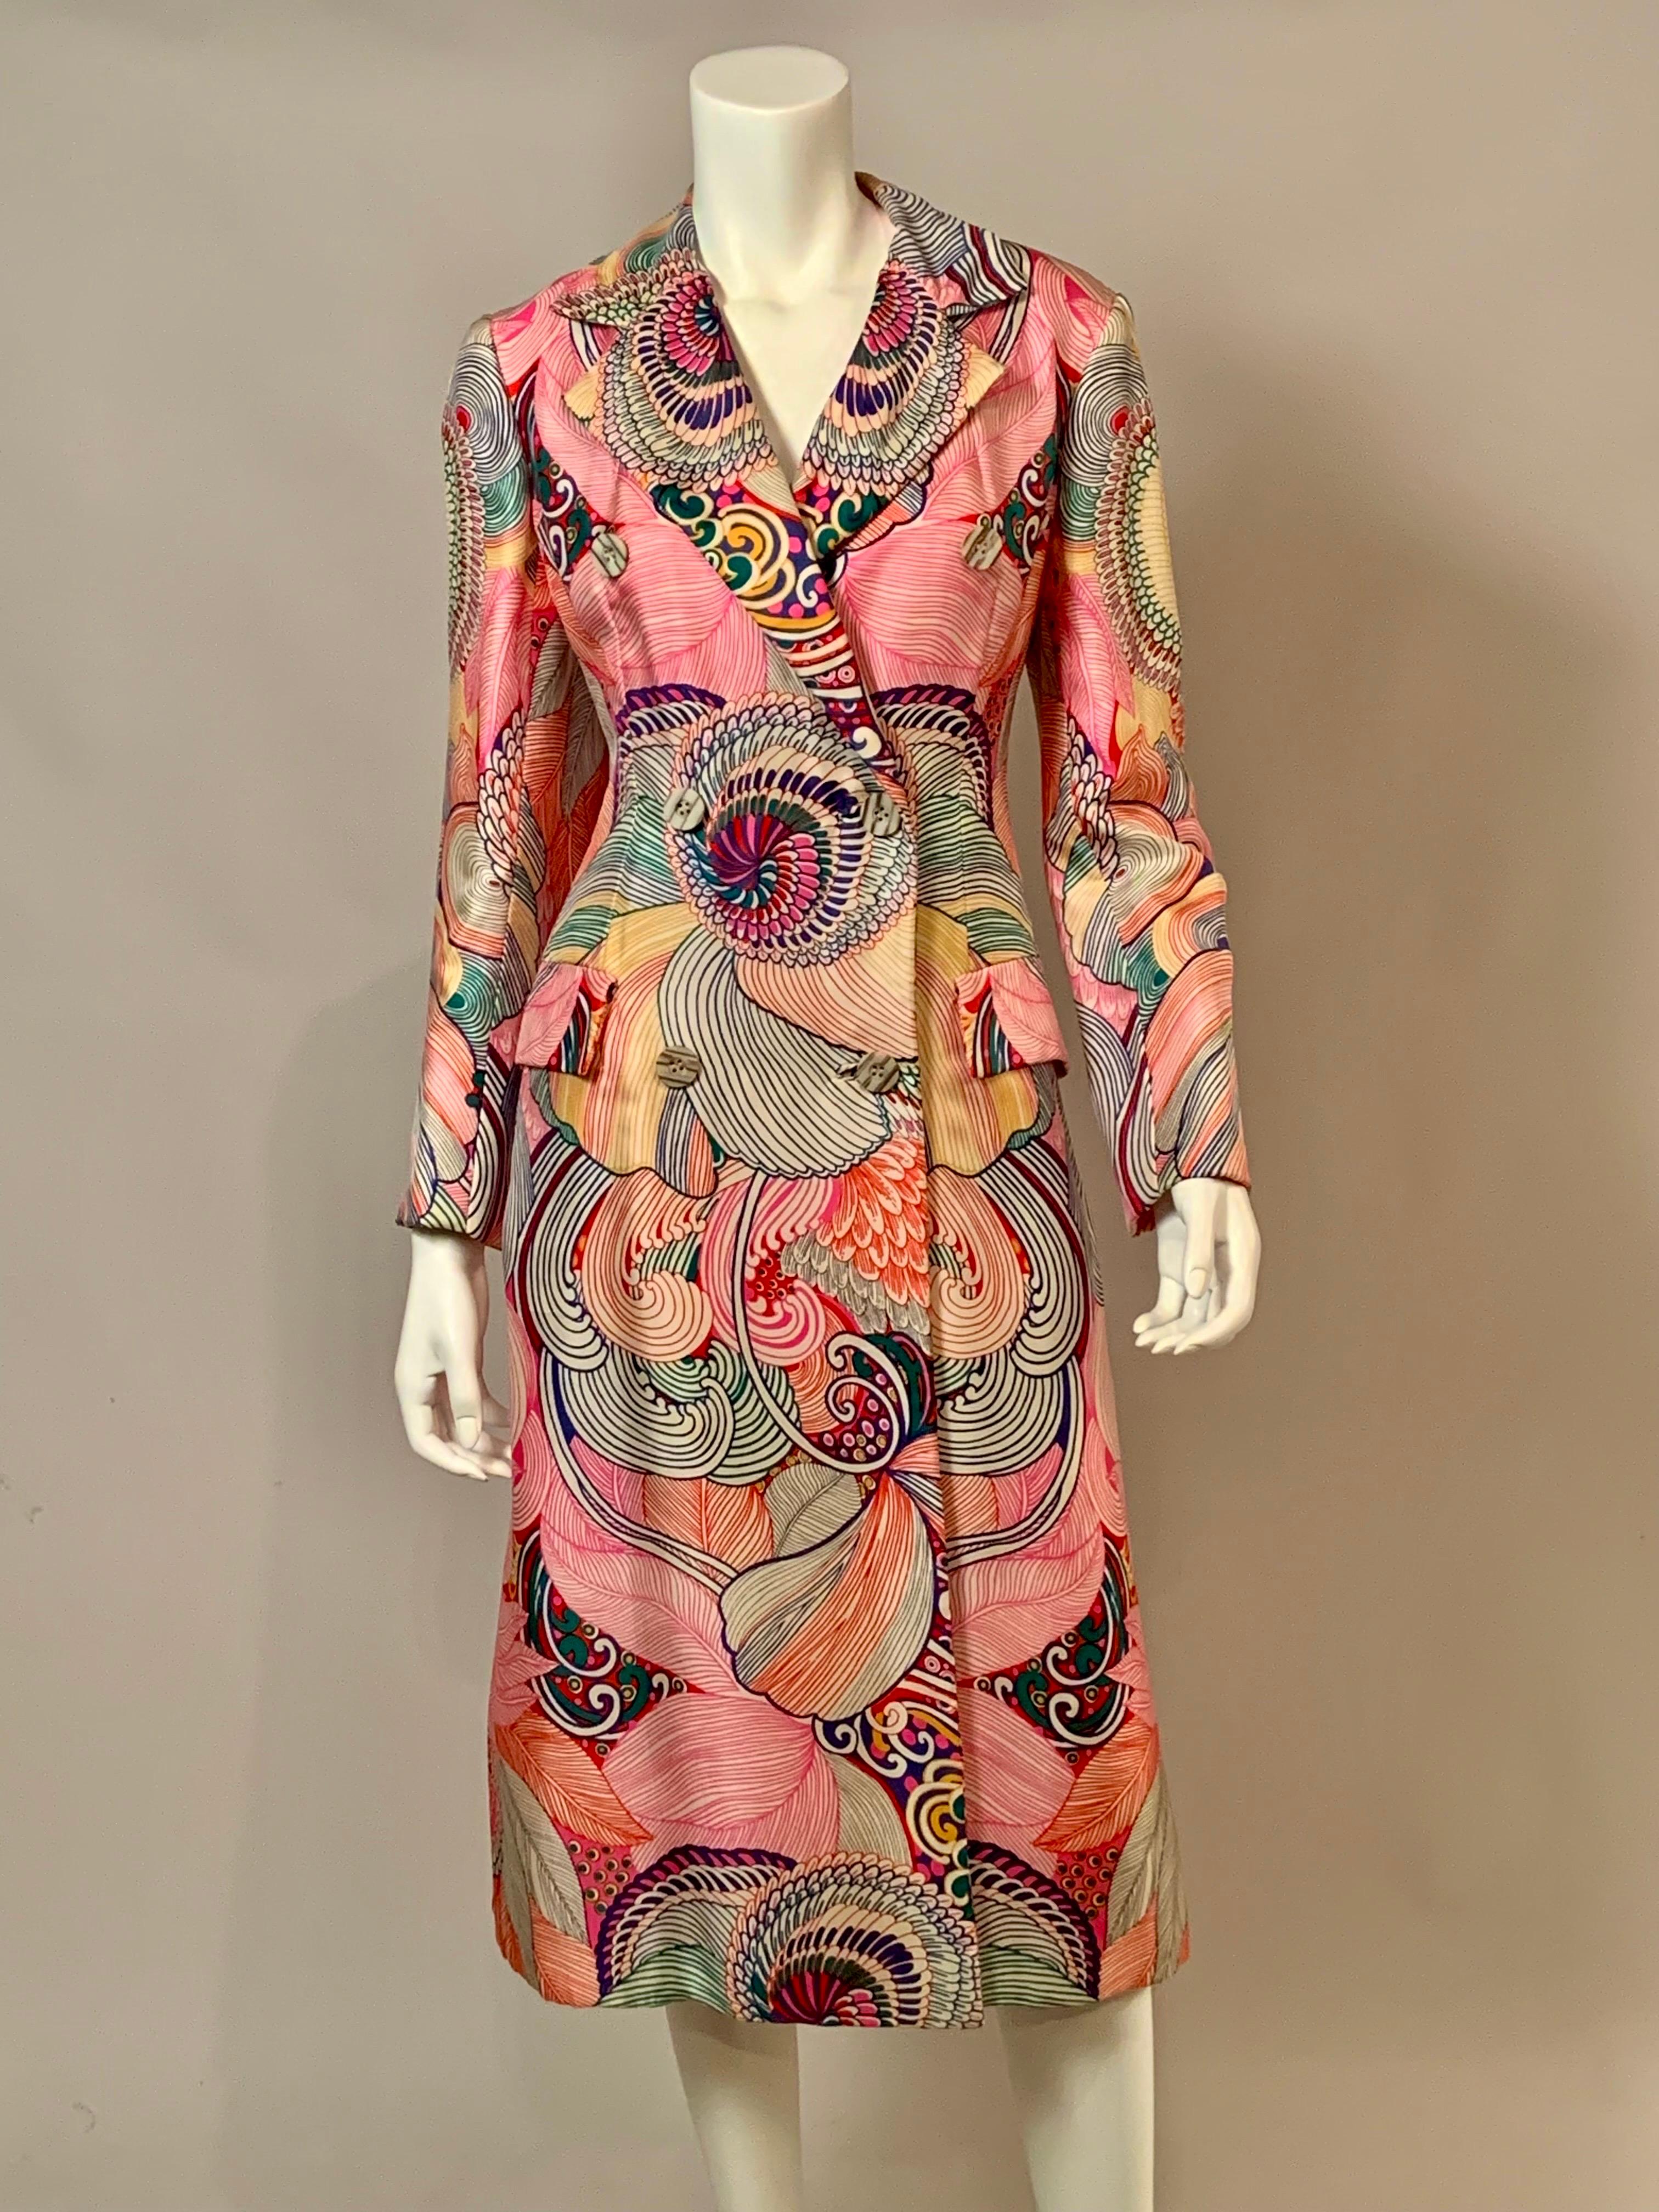 This 1970's silk coat from Bill Blass  is just stunning.  The colorful print is so evocative of the decade.  Large scale flowers are in shades of pink, orange, green, yellow, hot pink, and navy blue.  The fabric is so nice that Bill Blass lined the